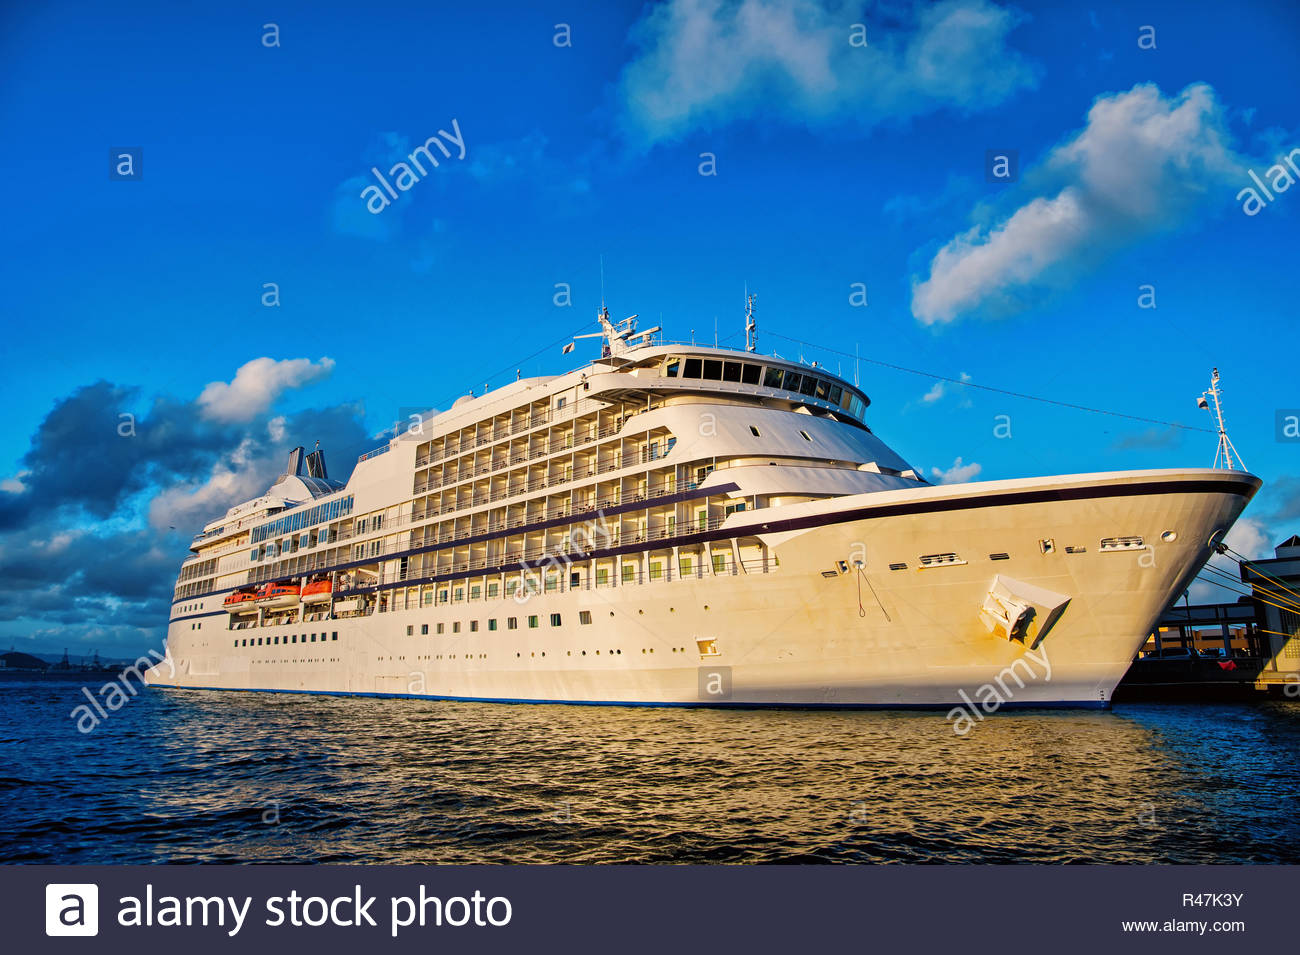 Large Luxury Cruise Ship On Sea And Cloudy Sky At Sunset